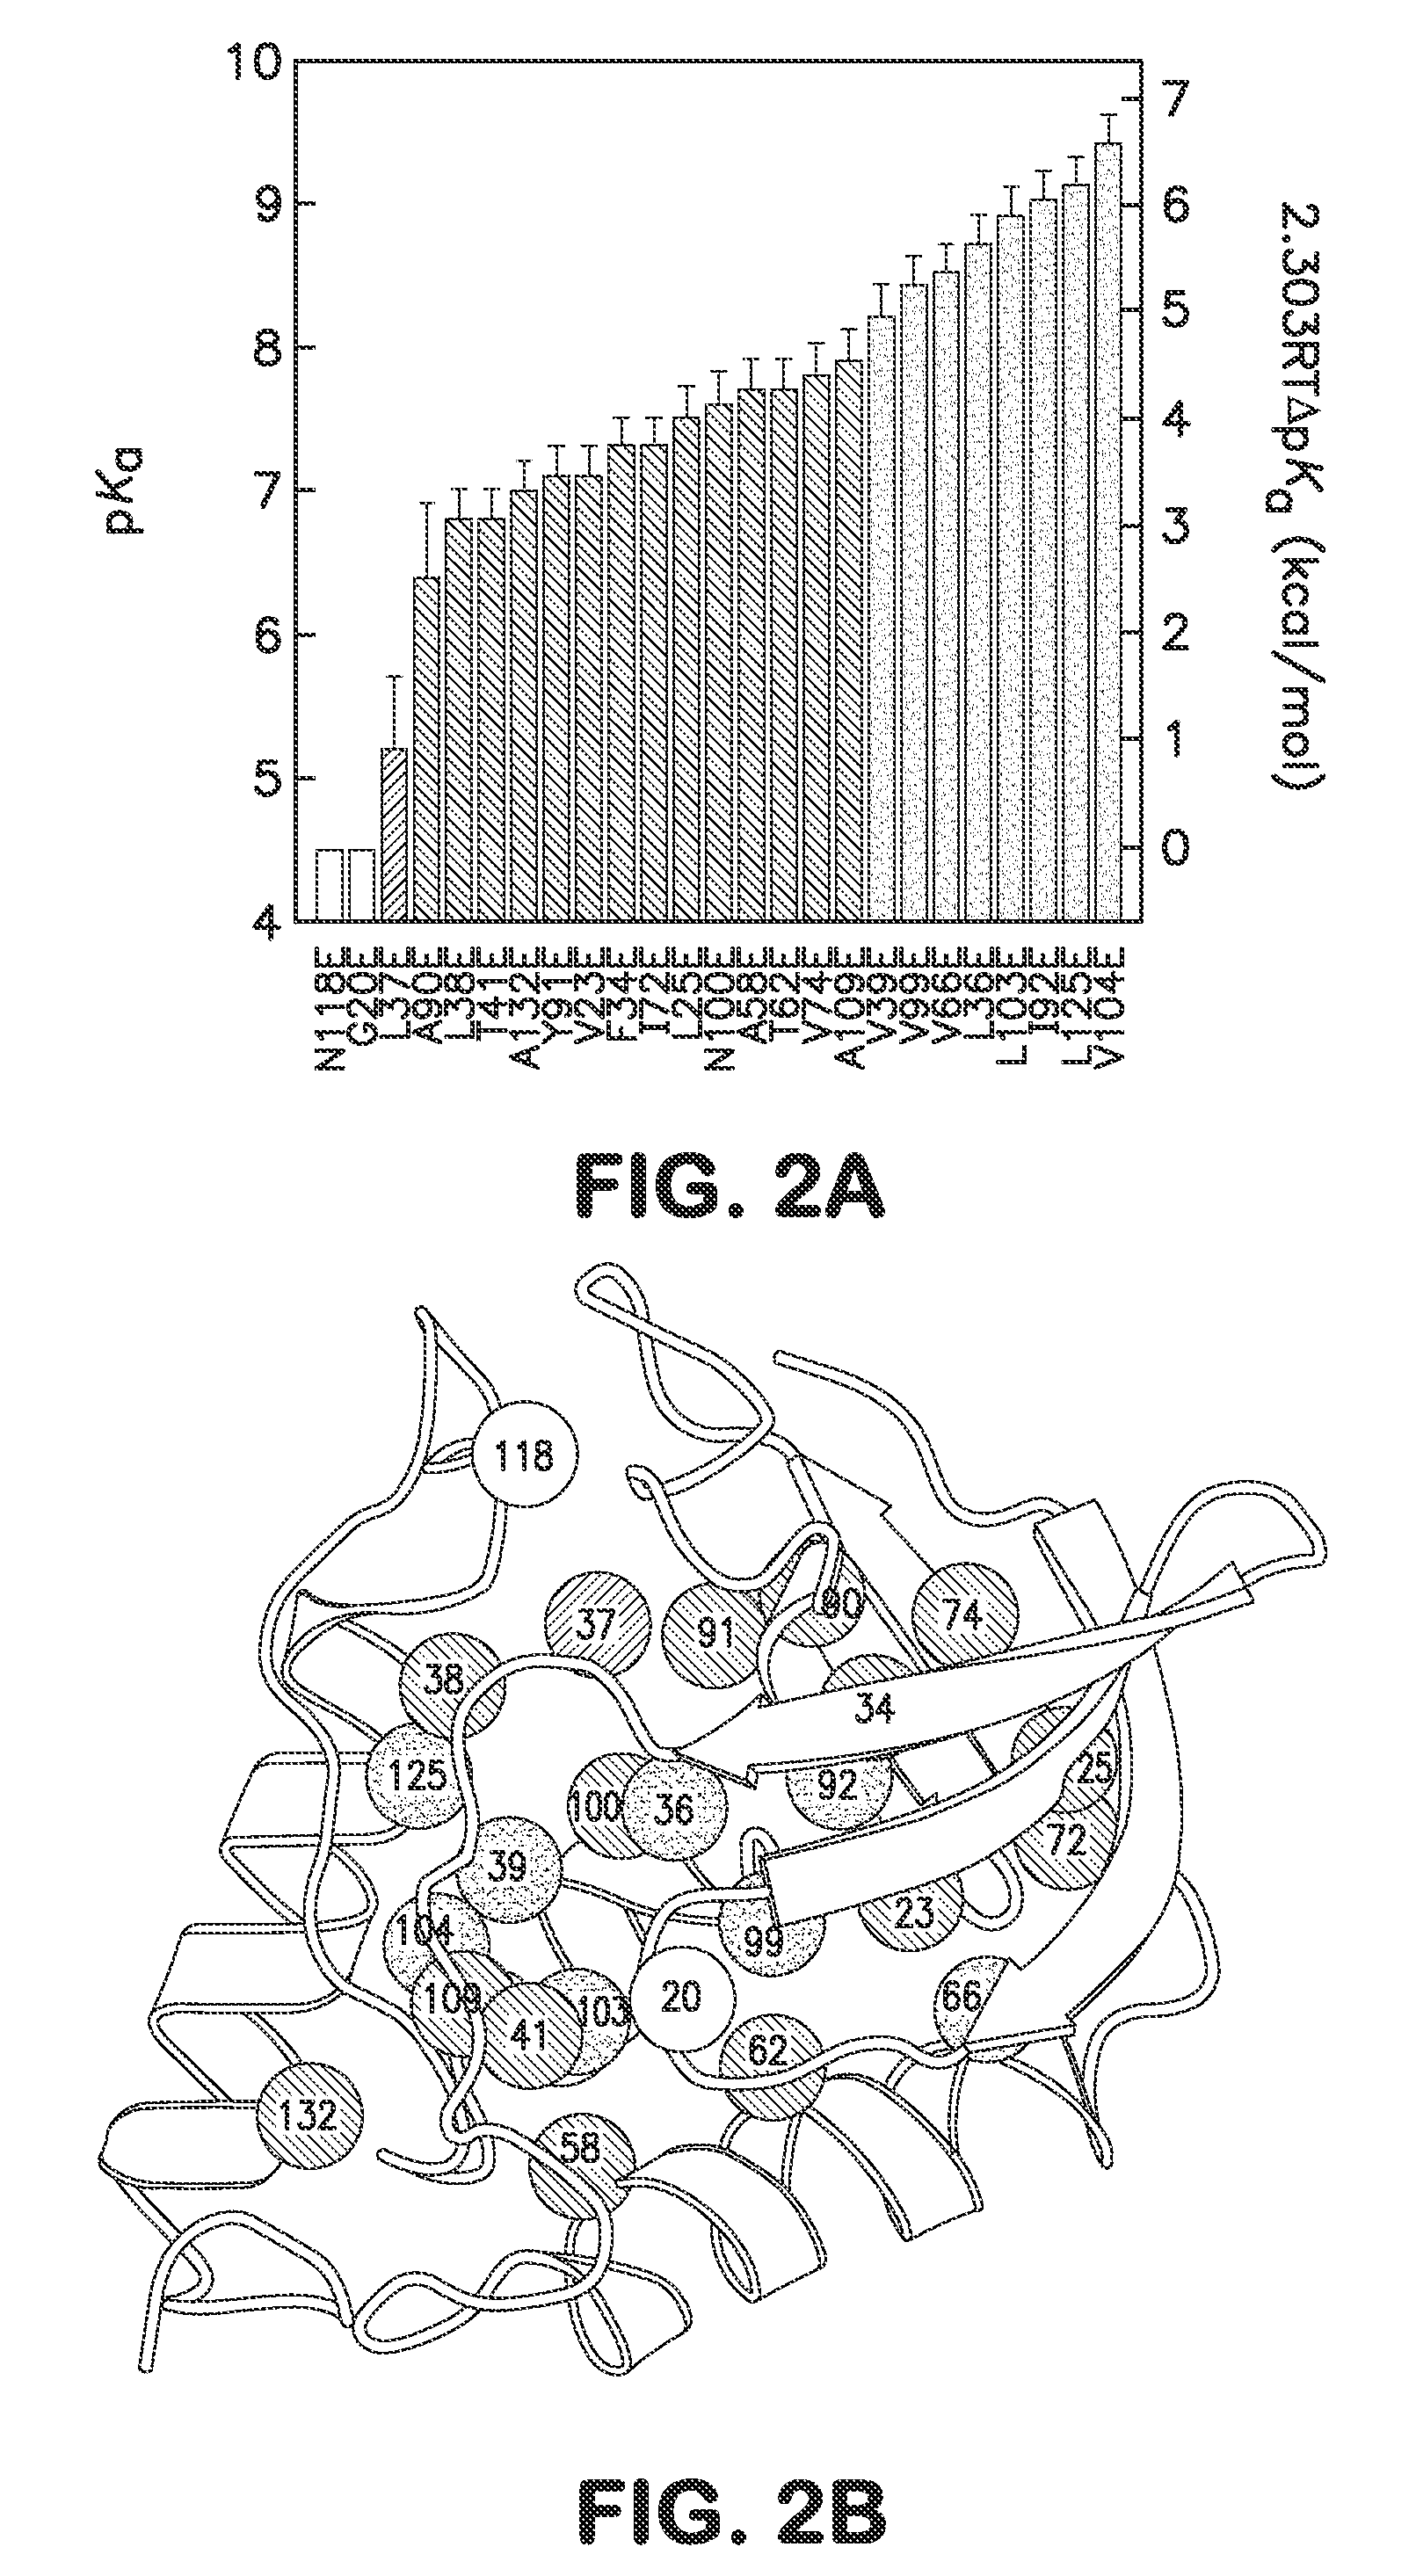 Method for Incorporating Internal Polar and Ionizable Groups in Proteins